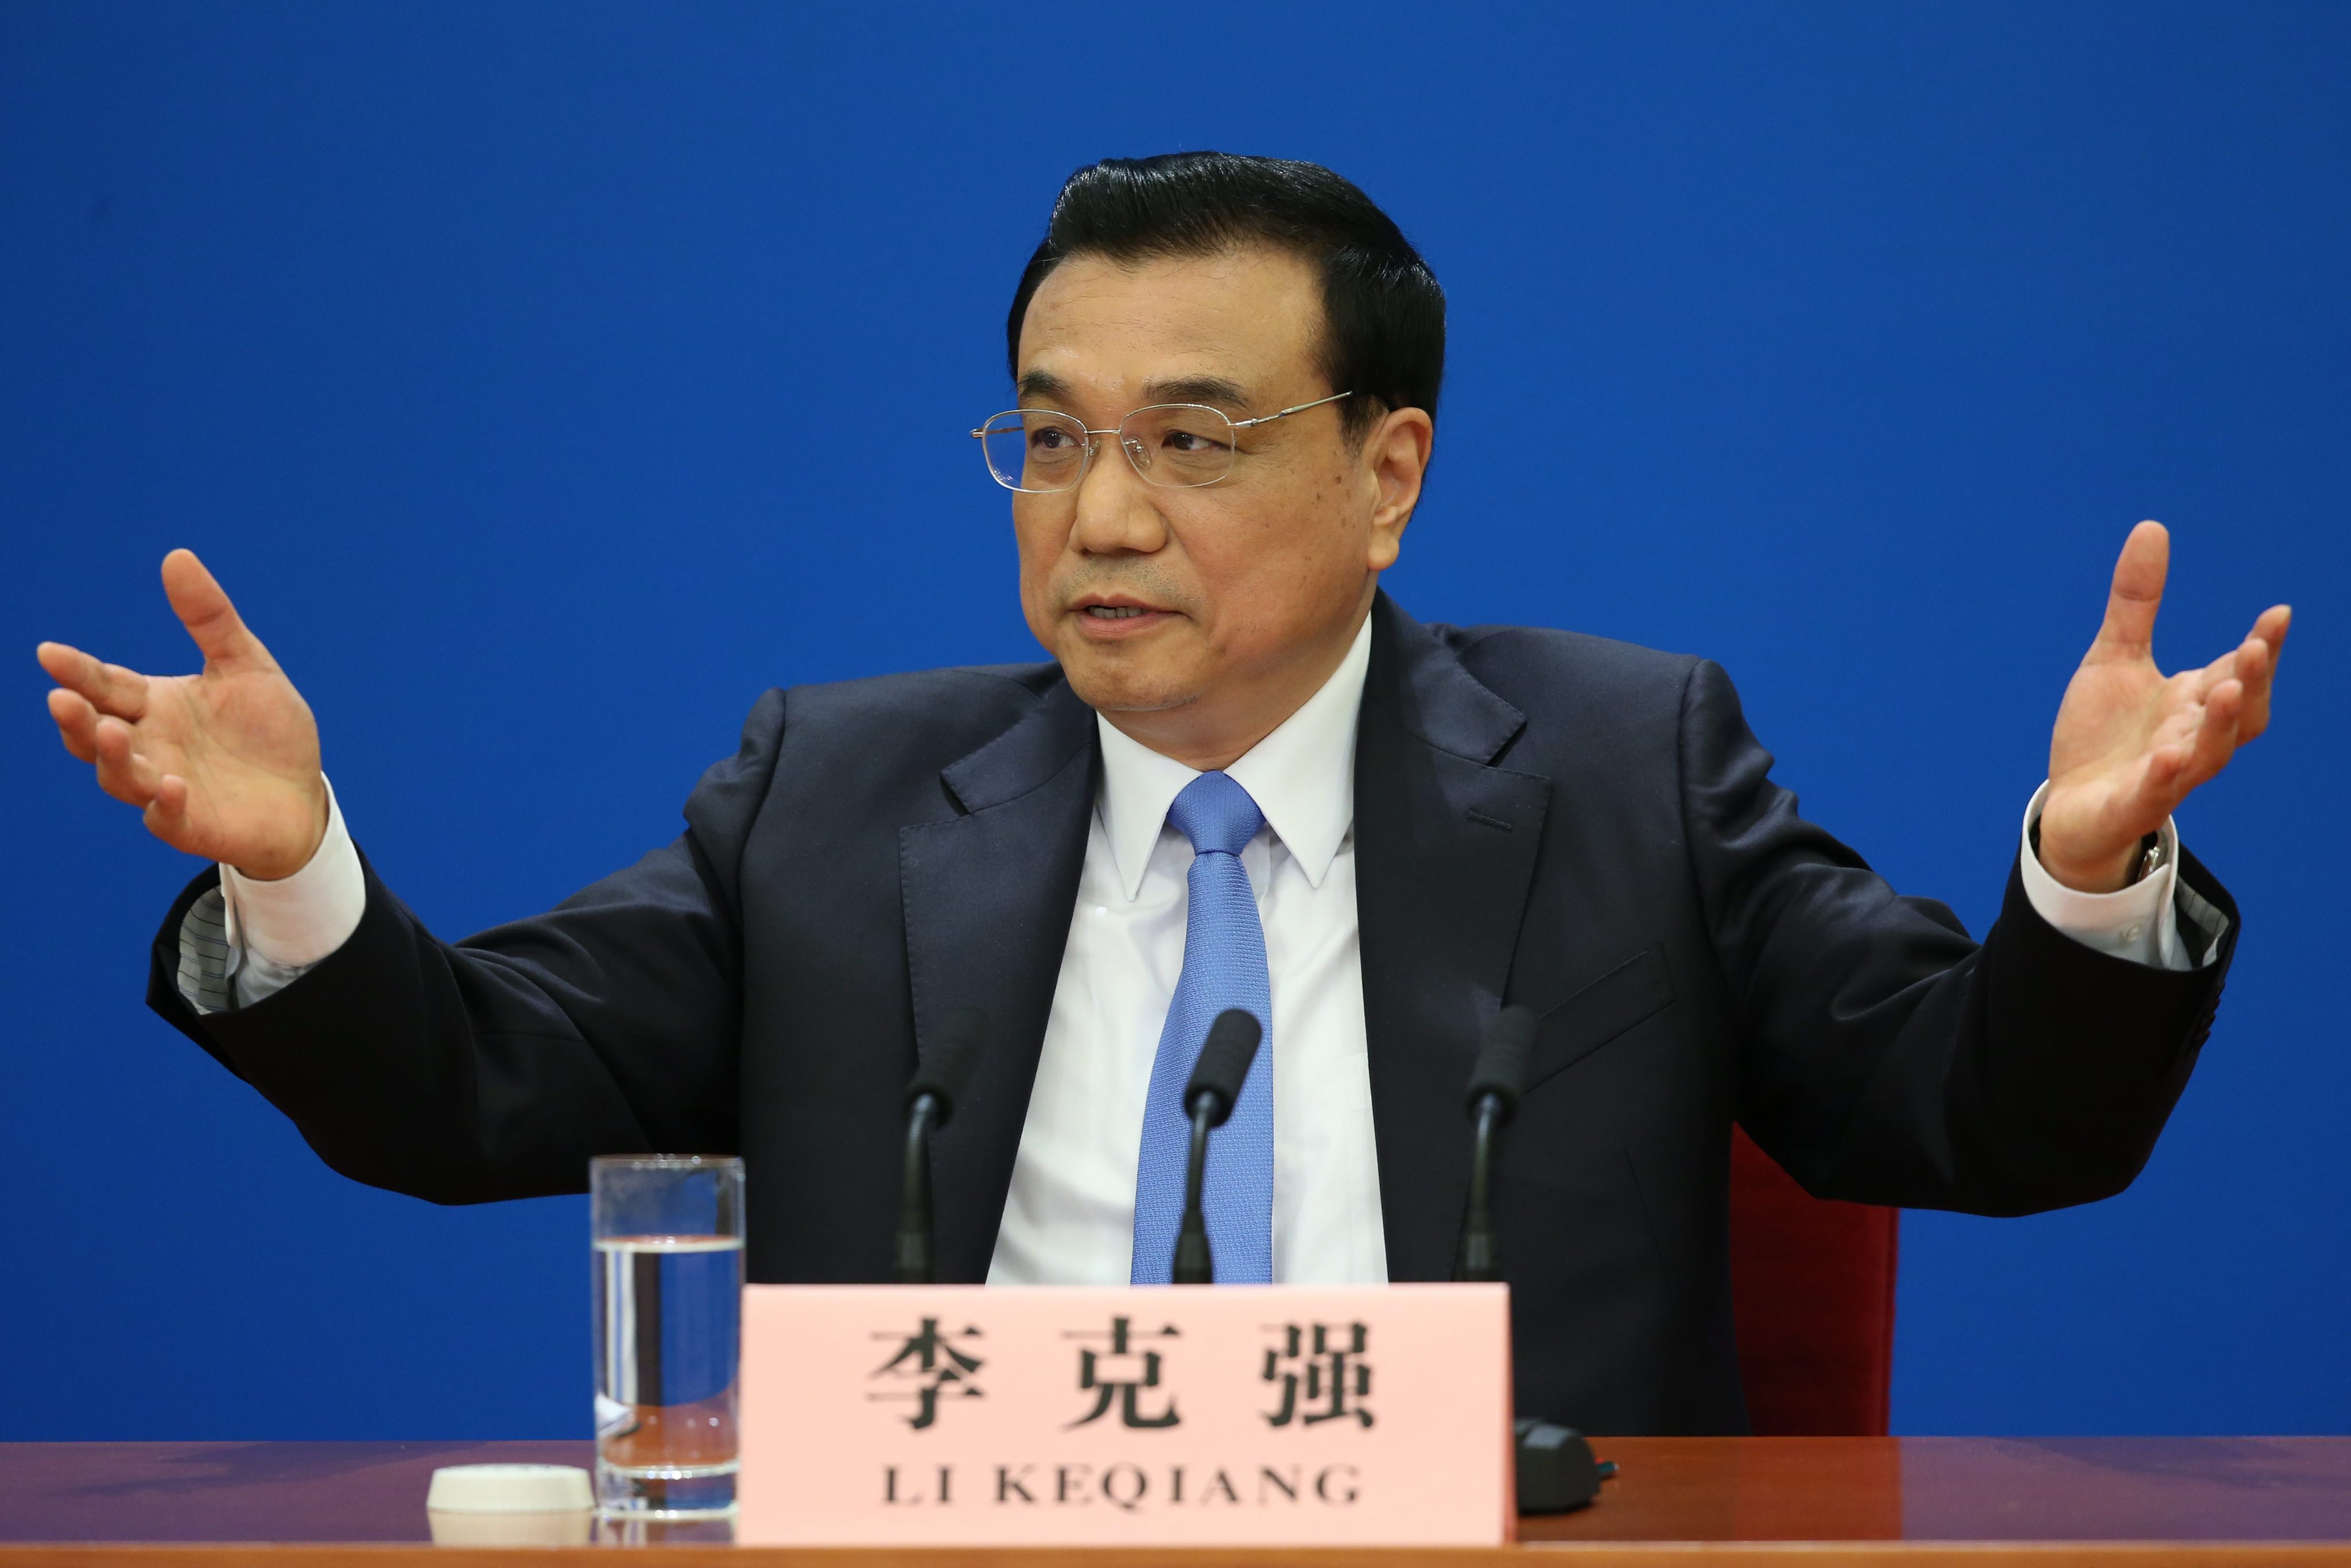 Premier Li answering questions at Sunday morning's press event in Beijing. Photo: EPA